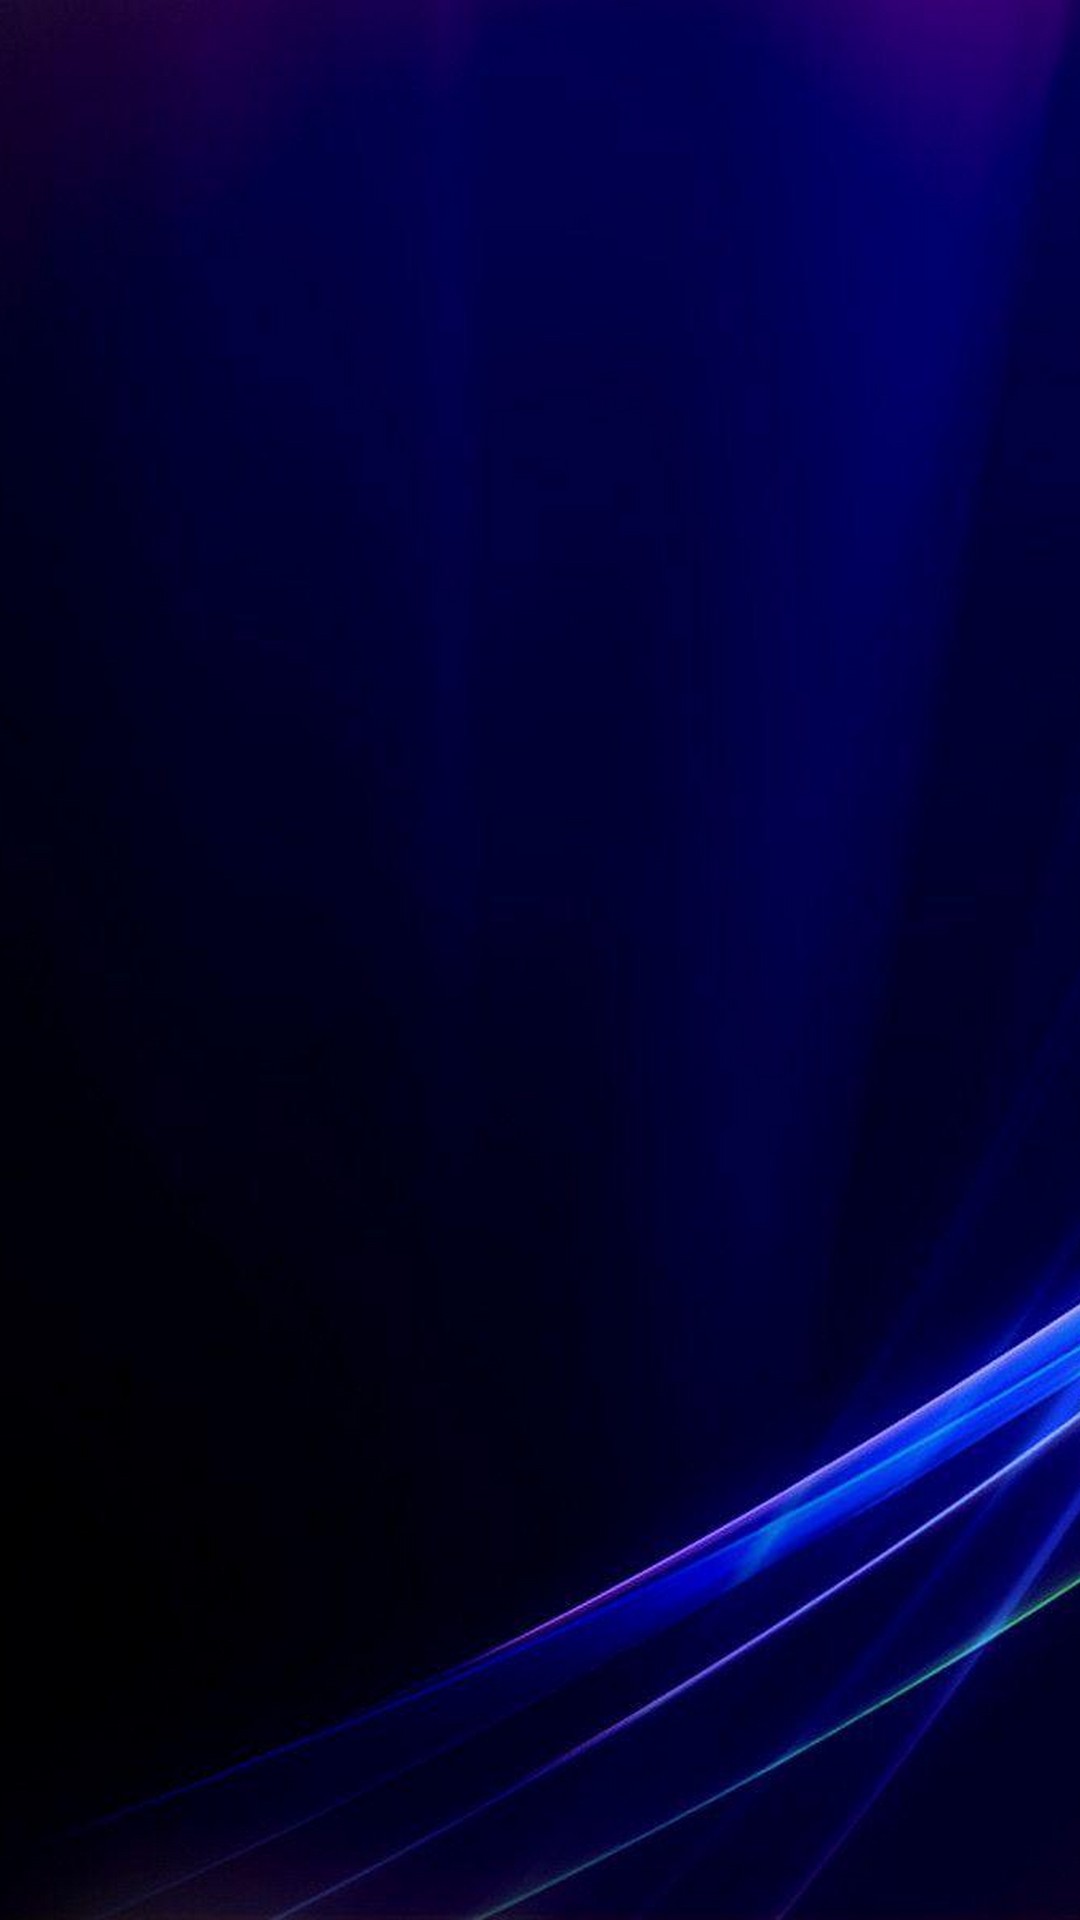 Blue Neon Android Wallpaper With high-resolution 1080X1920 pixel. You can use this wallpaper for your Android backgrounds, Tablet, Samsung Screensavers, Mobile Phone Lock Screen and another Smartphones device